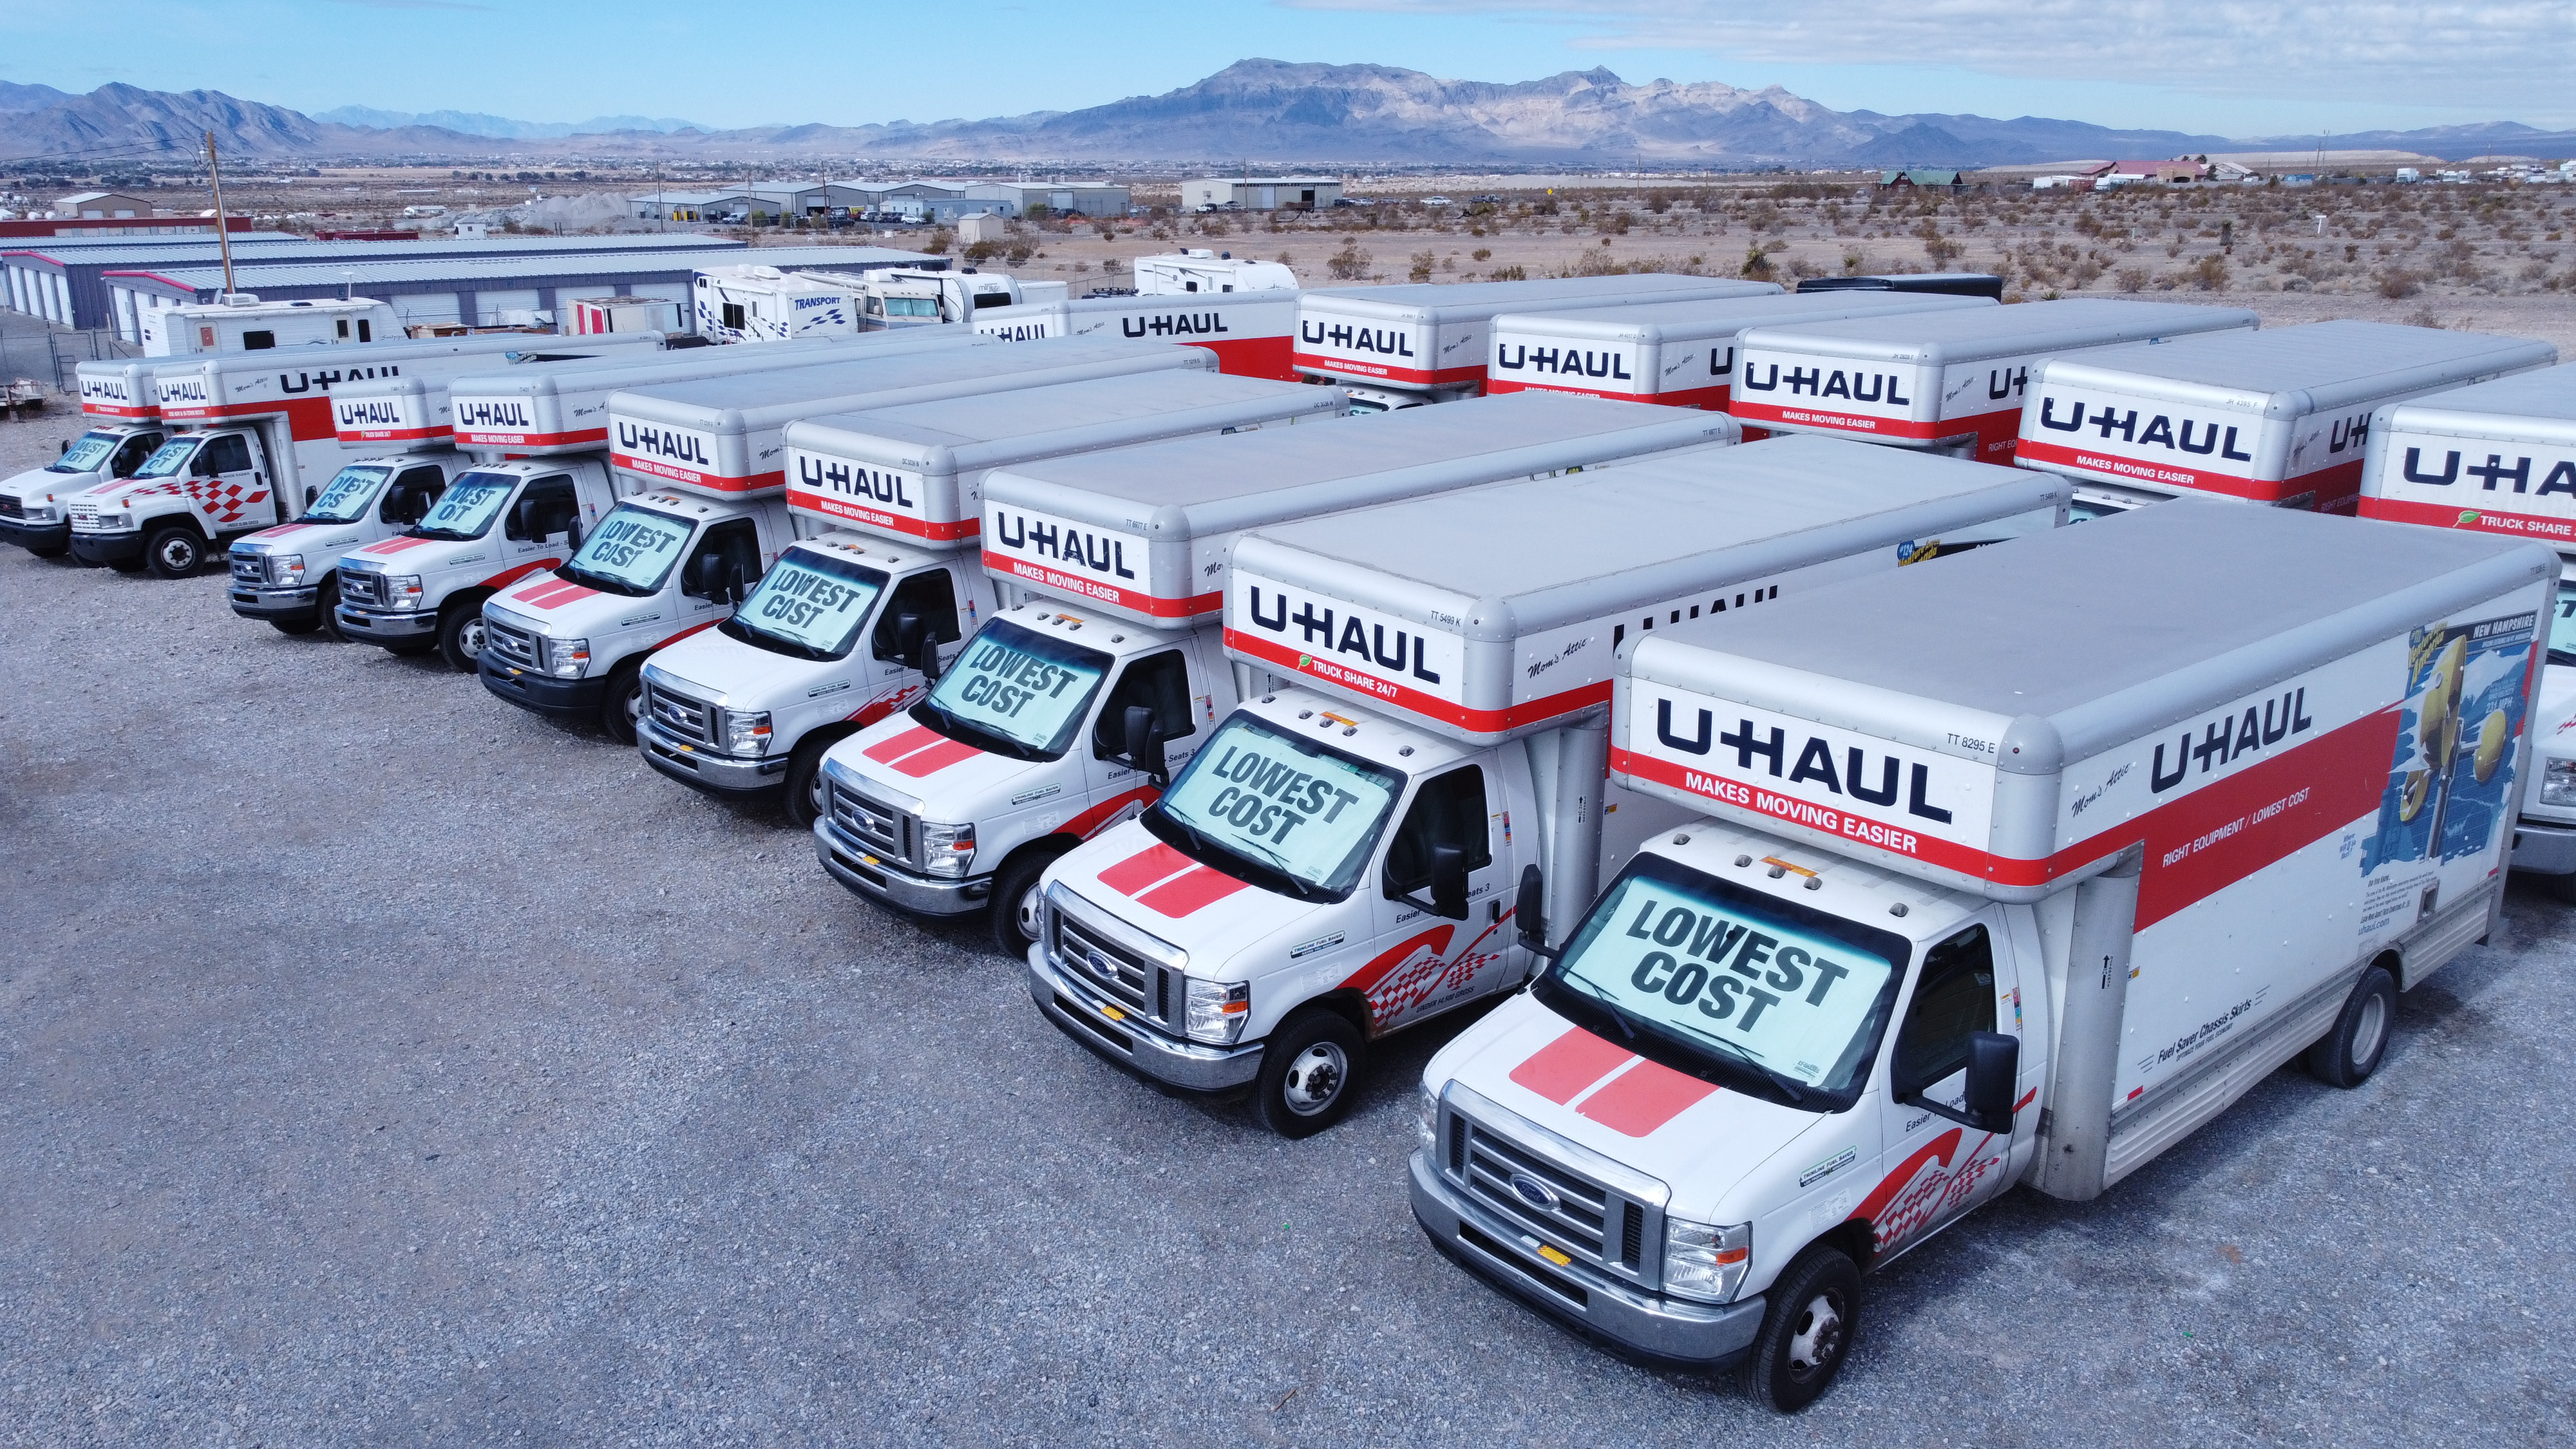 uhaul rentals available here